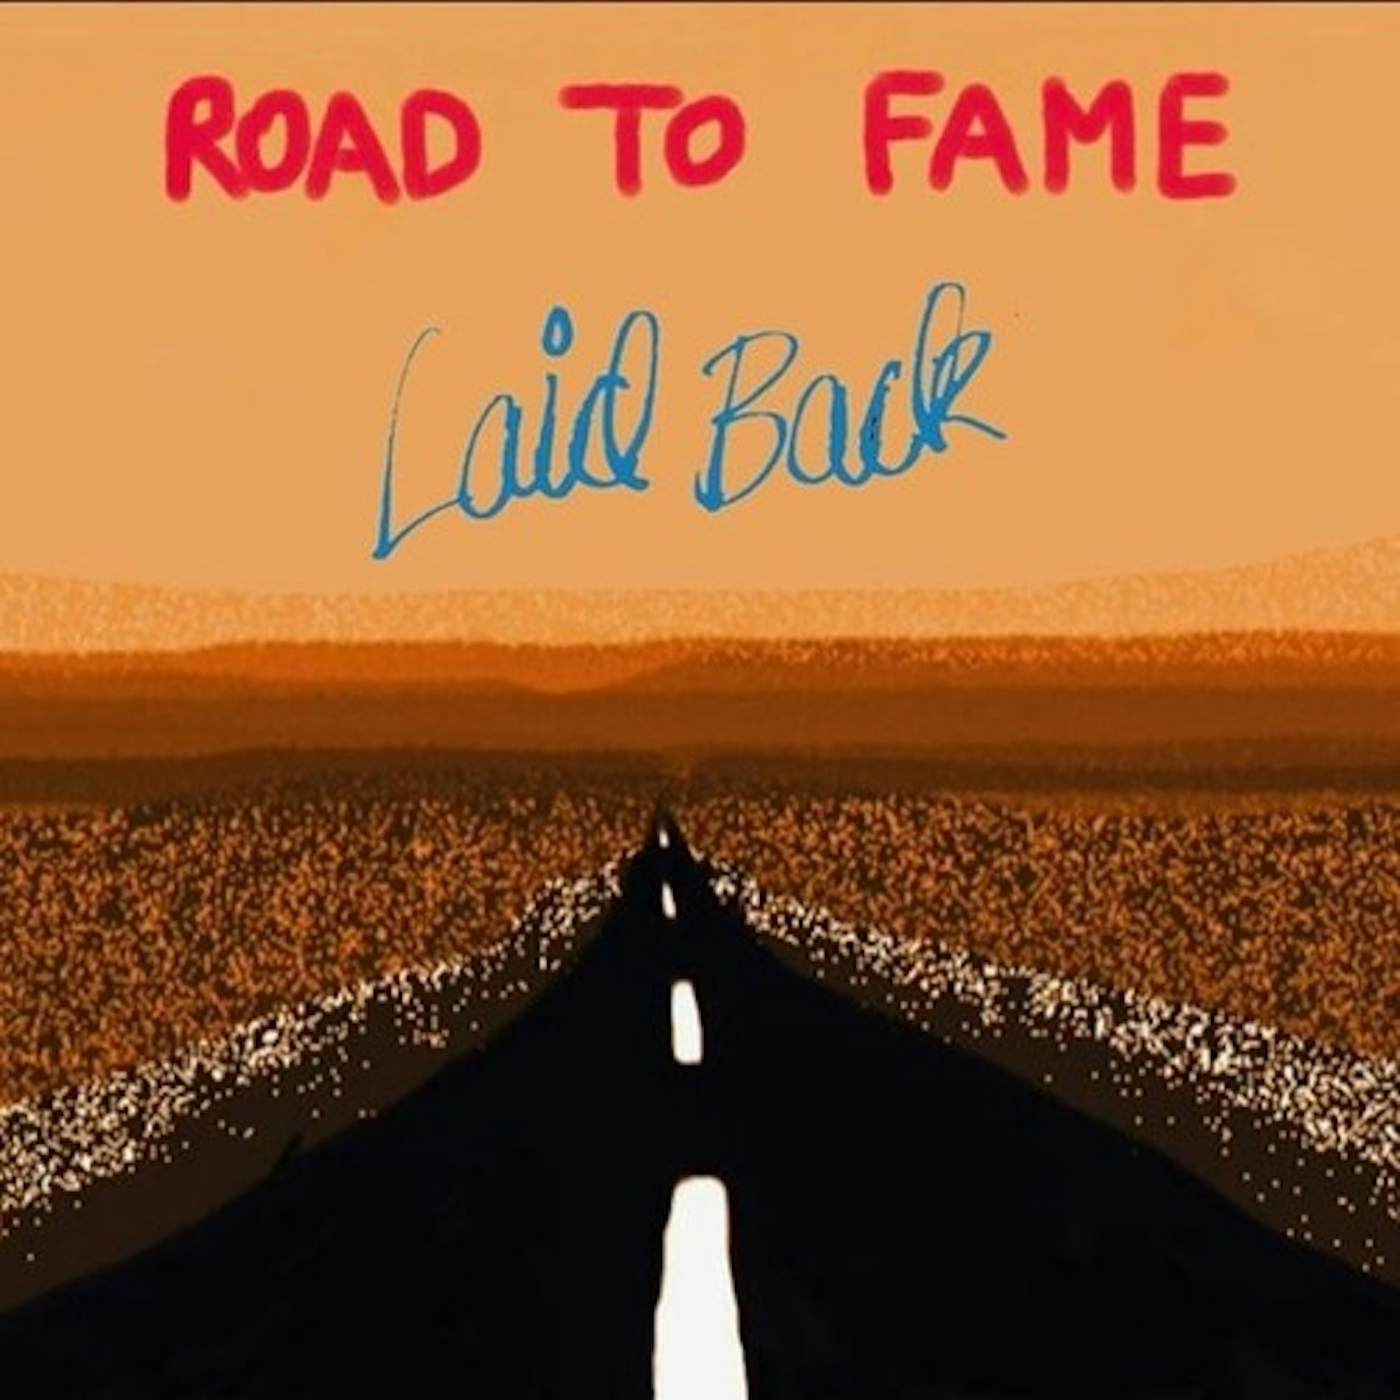 Laid Back Road To Fame Vinyl Record